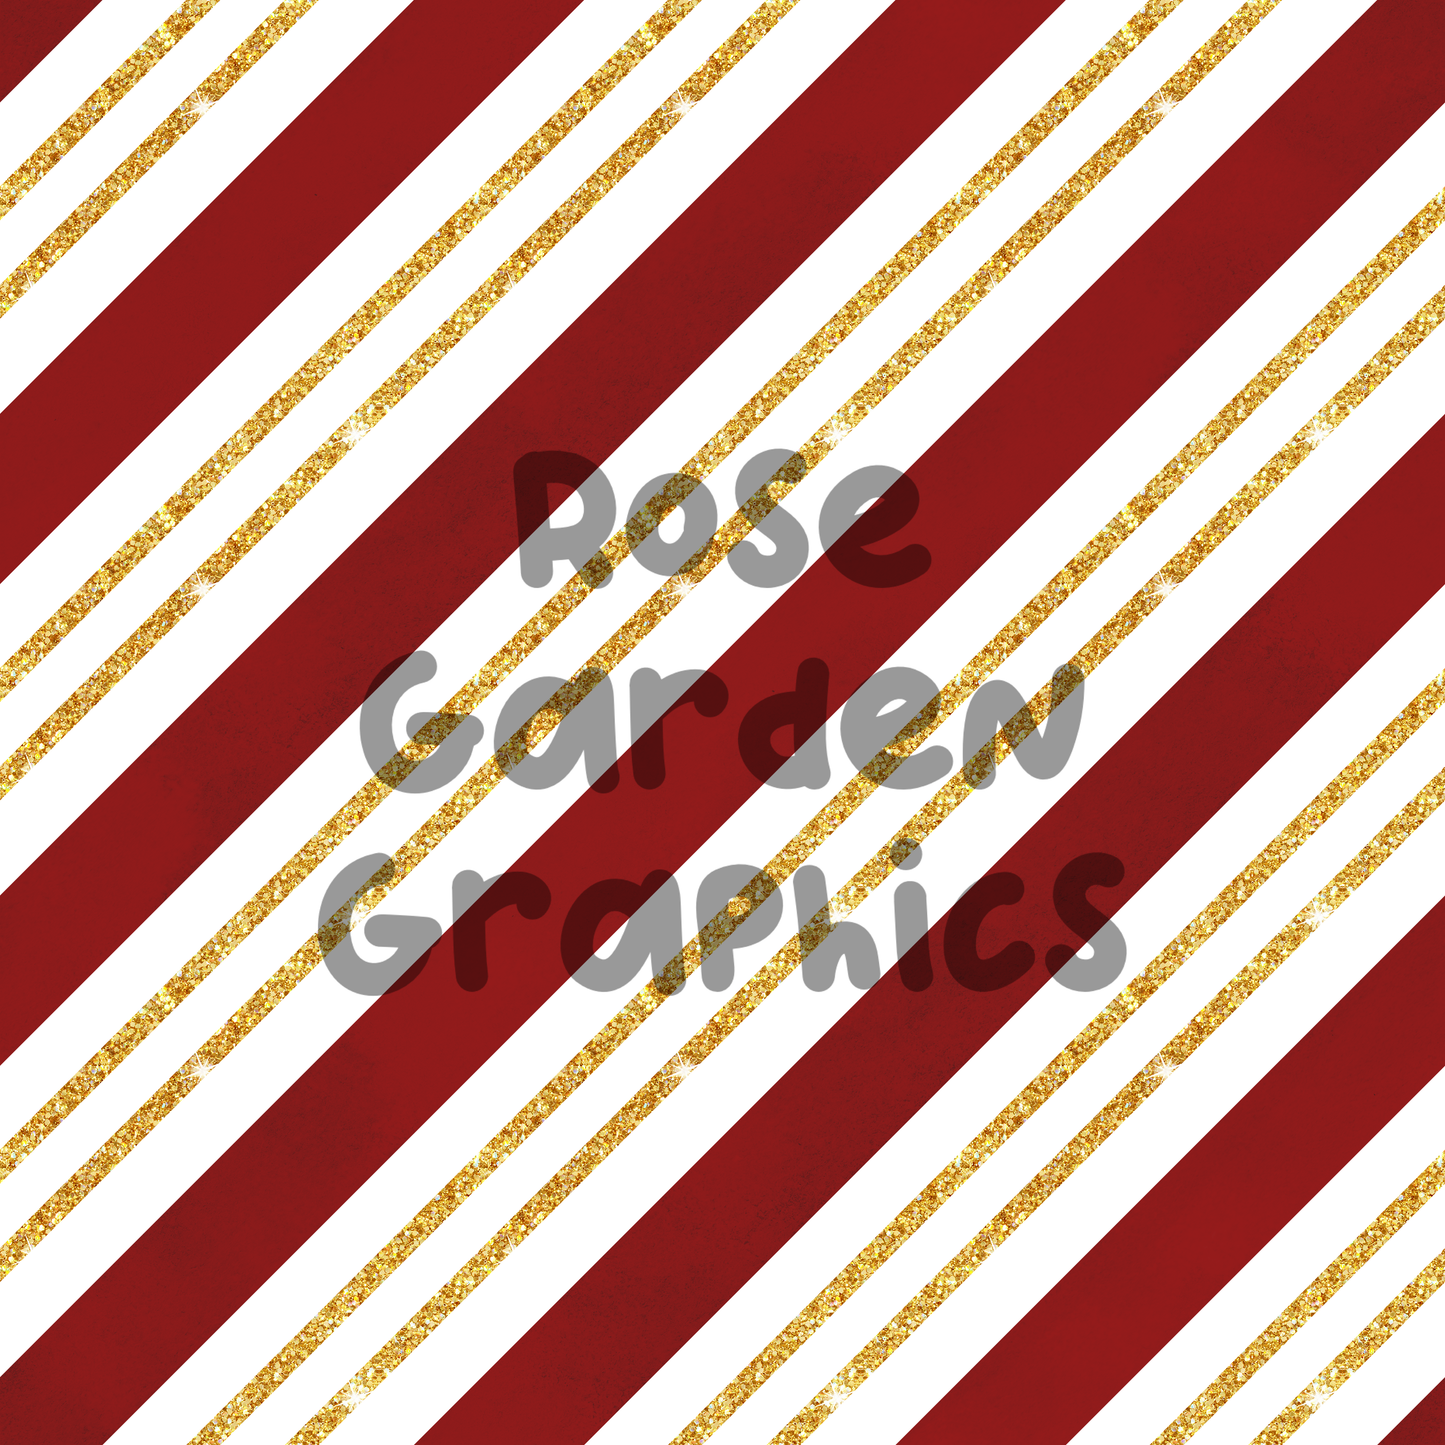 Candy Cane Diagonal Glitter Stripes 2 Seamless Images